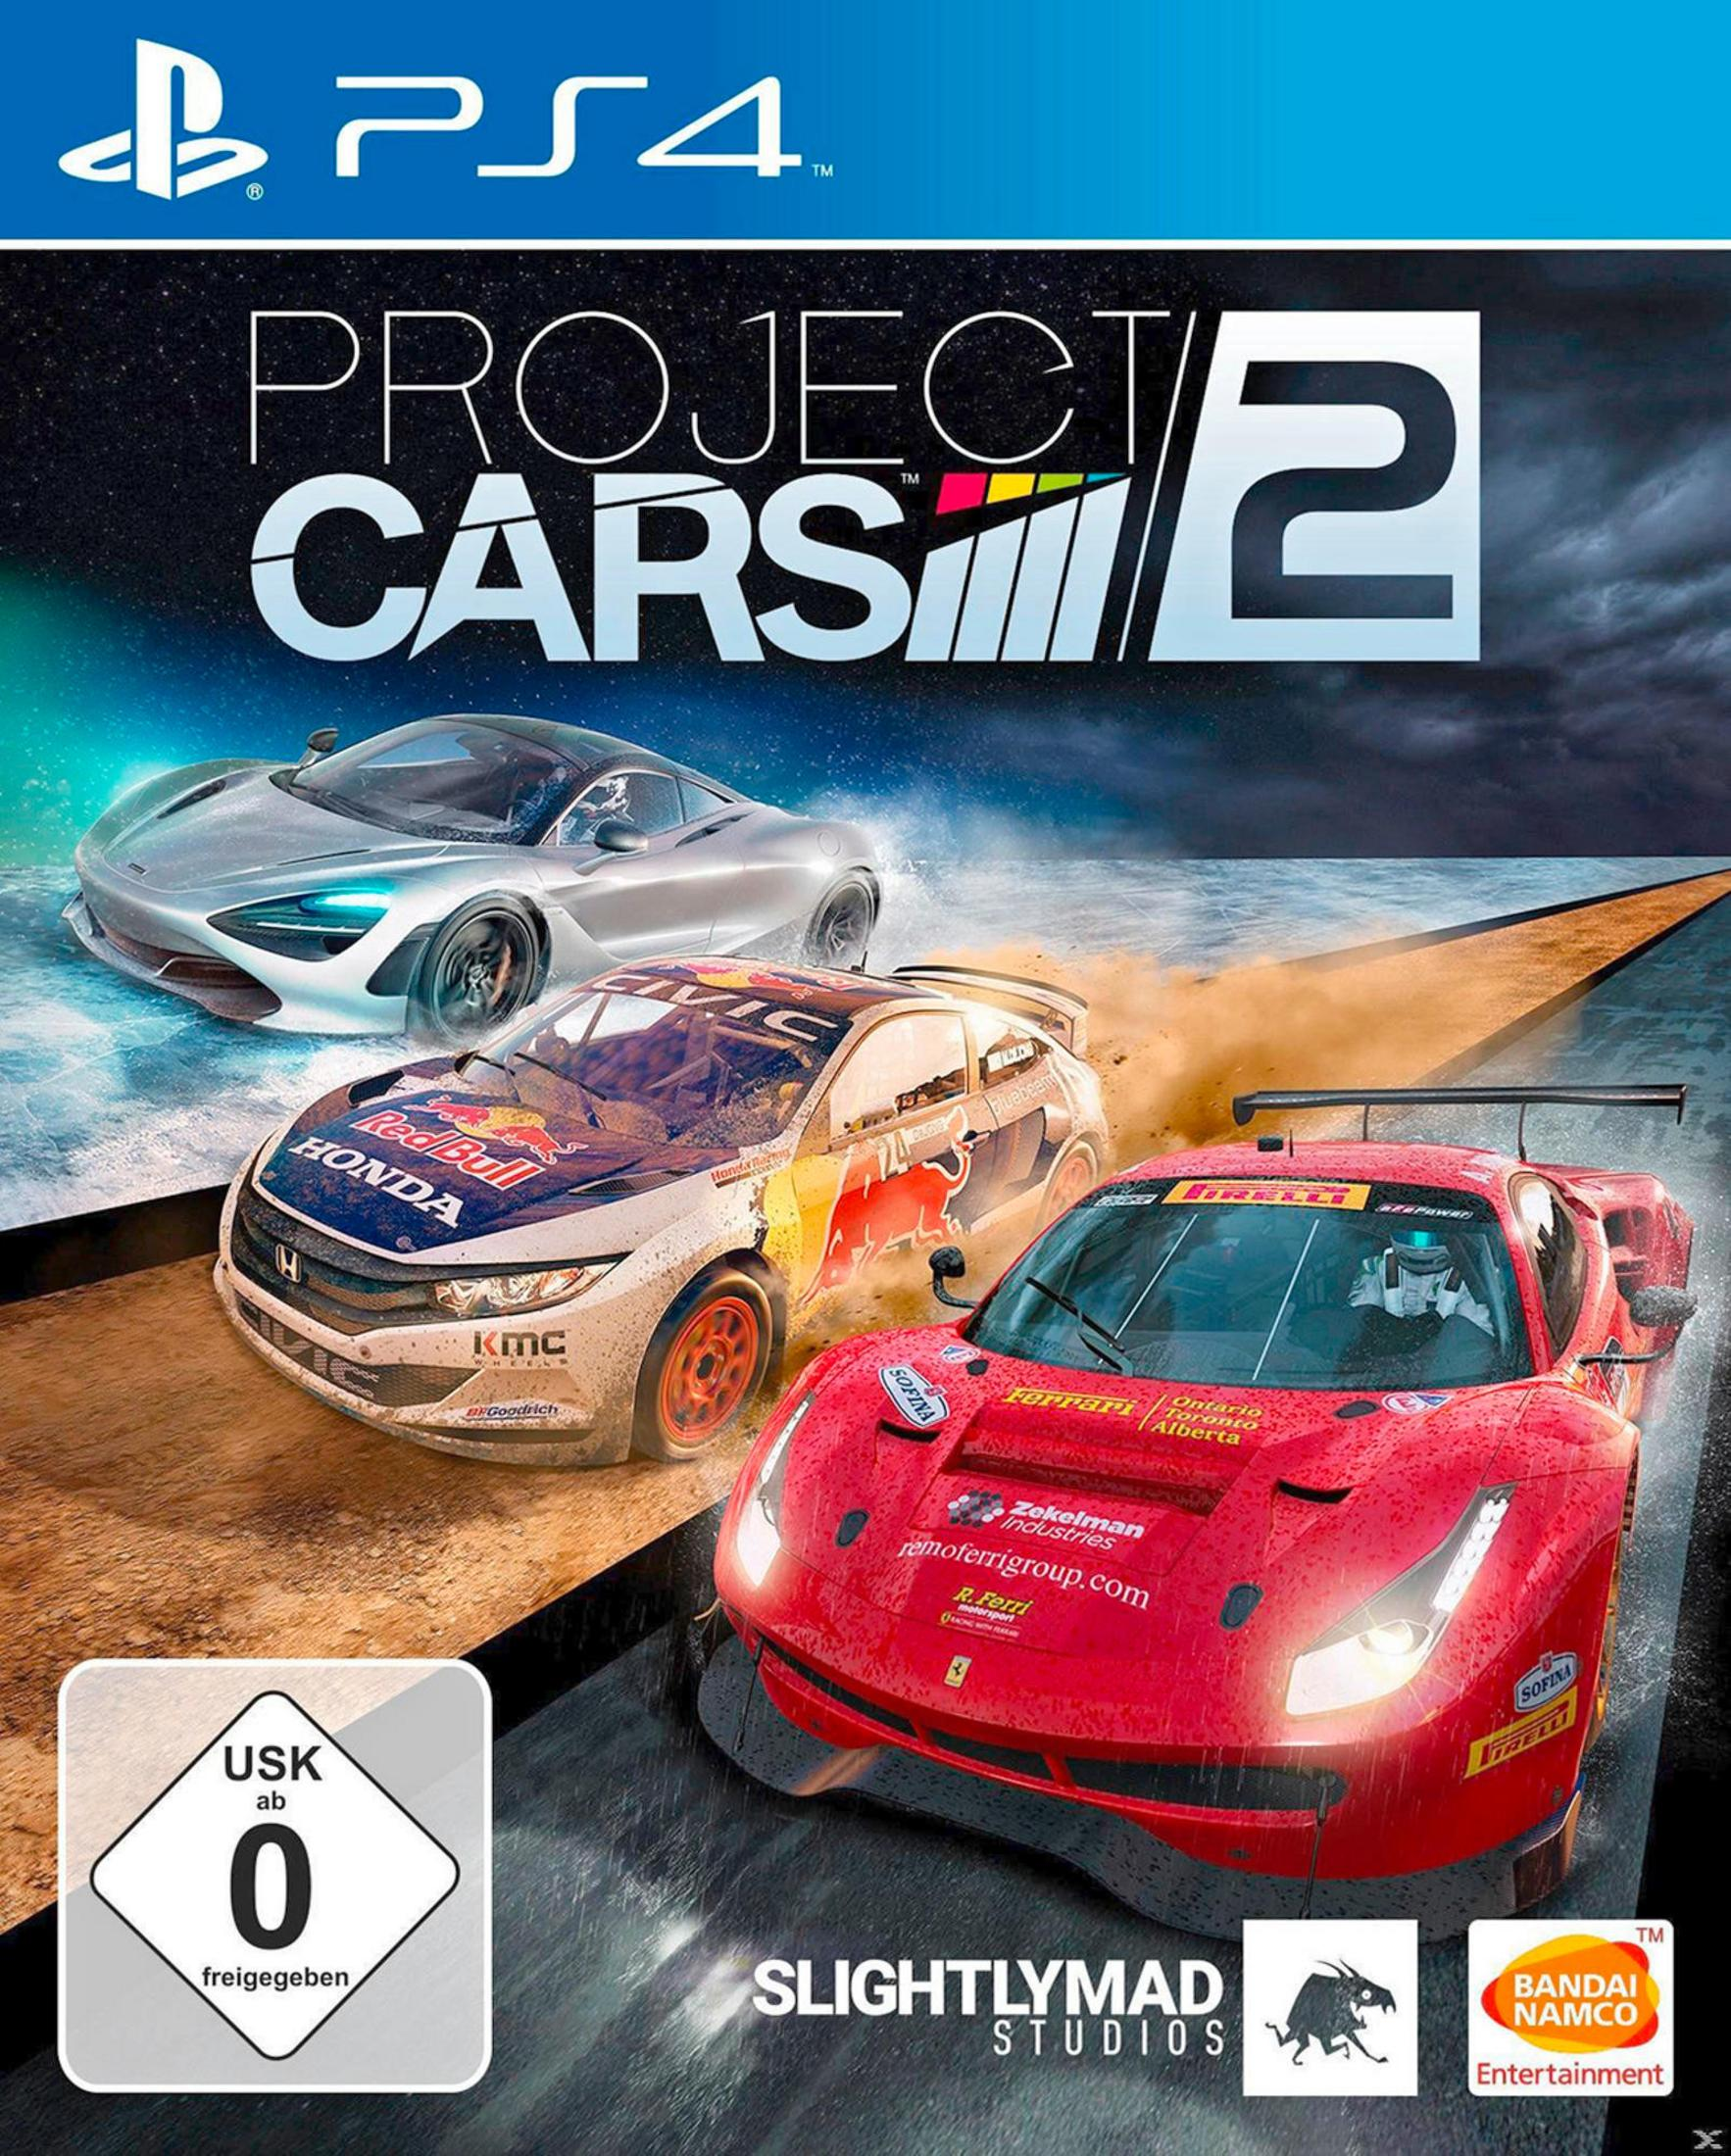 Cars [PlayStation - 2 4] Project